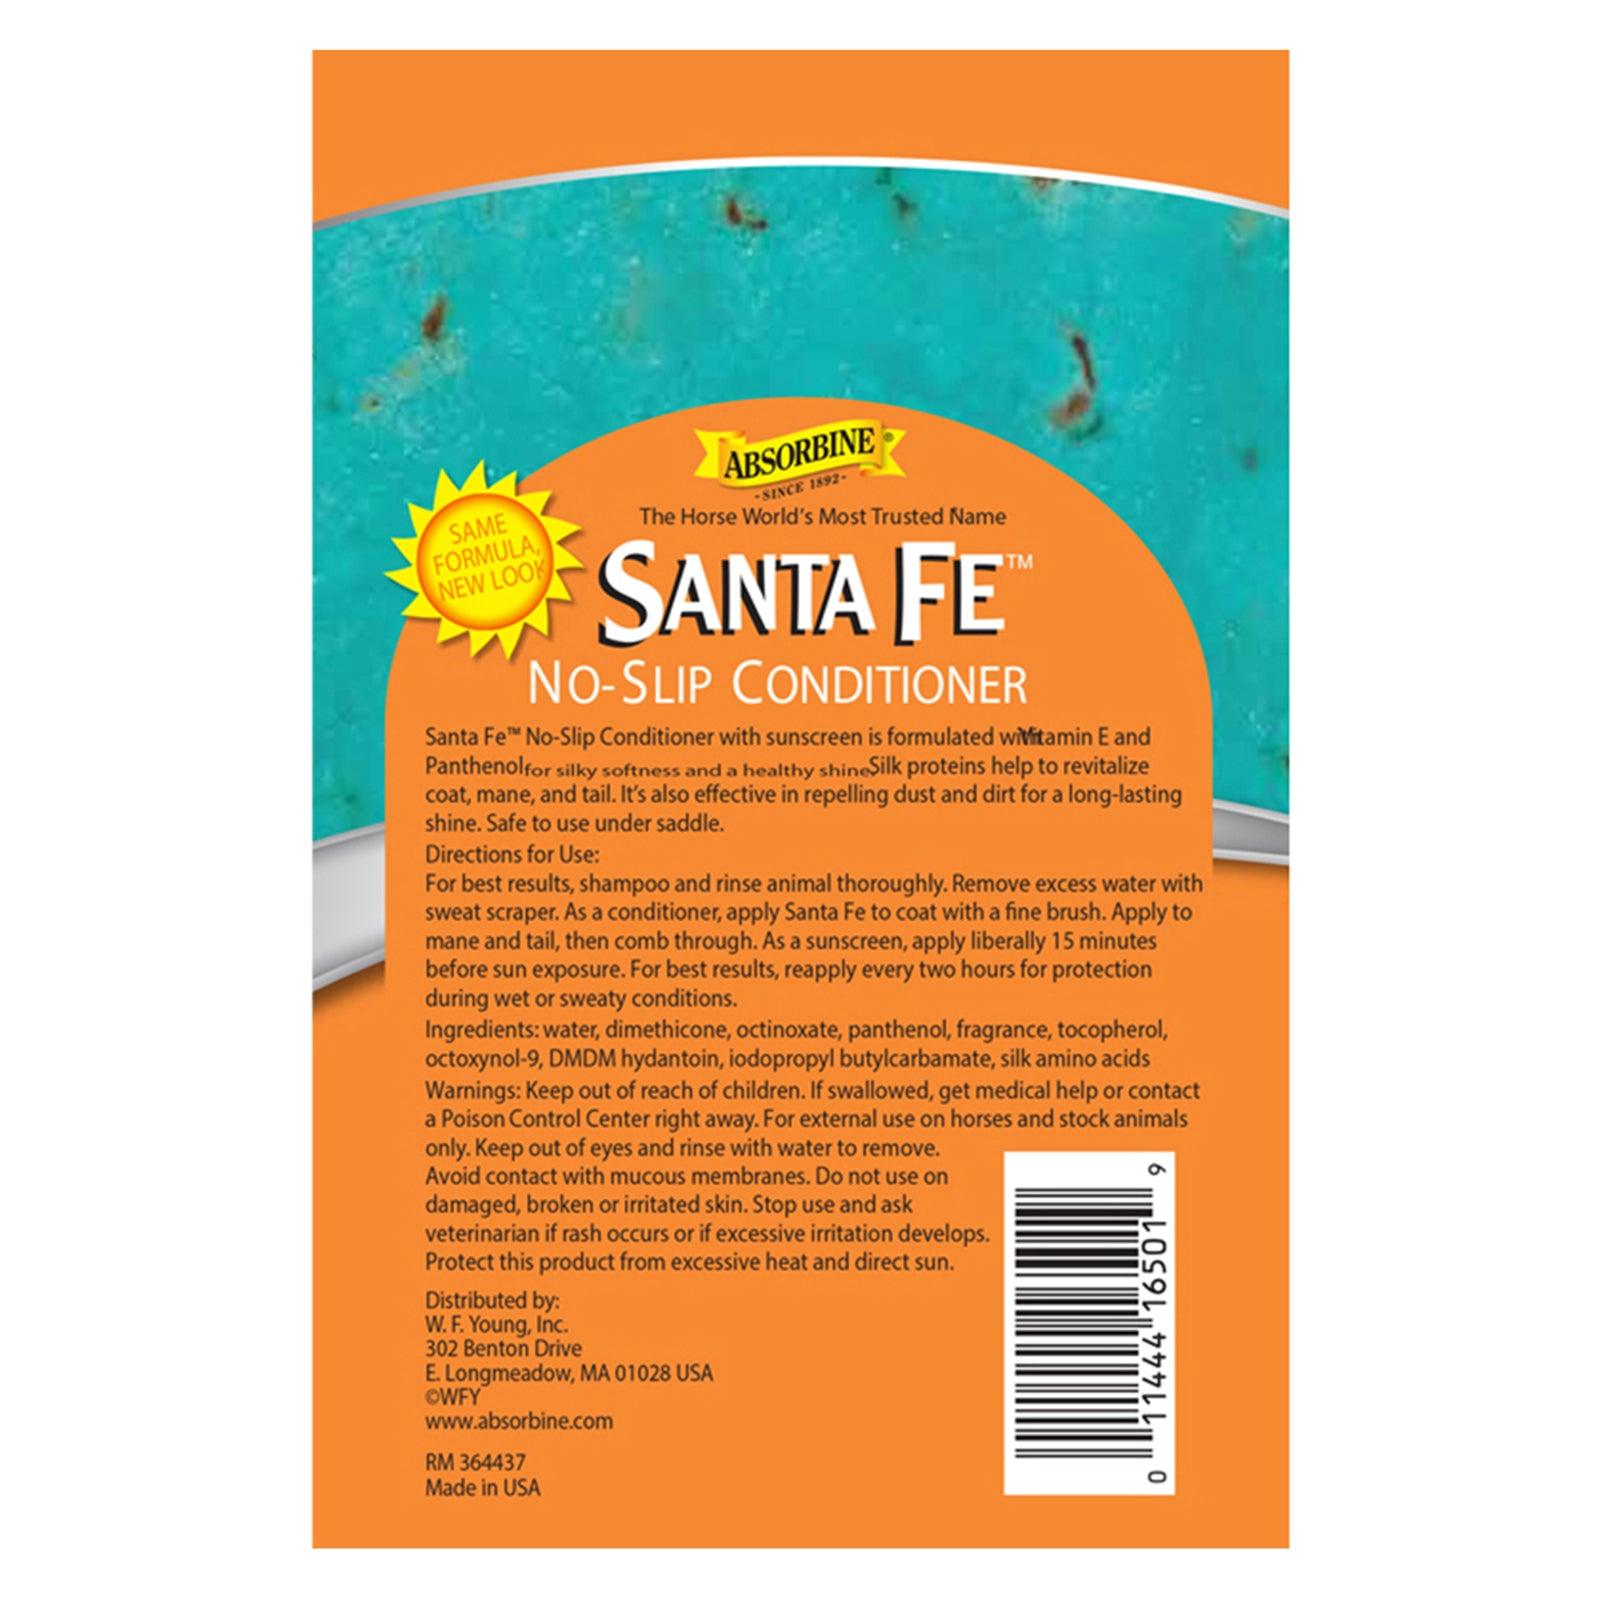 Santa Fe No-Slip Conditioner with sunscreen. Nourishes with Vitamin E pH balanced for horses. Not slippery under the saddle 32 fluid ounce spray bottle back label.